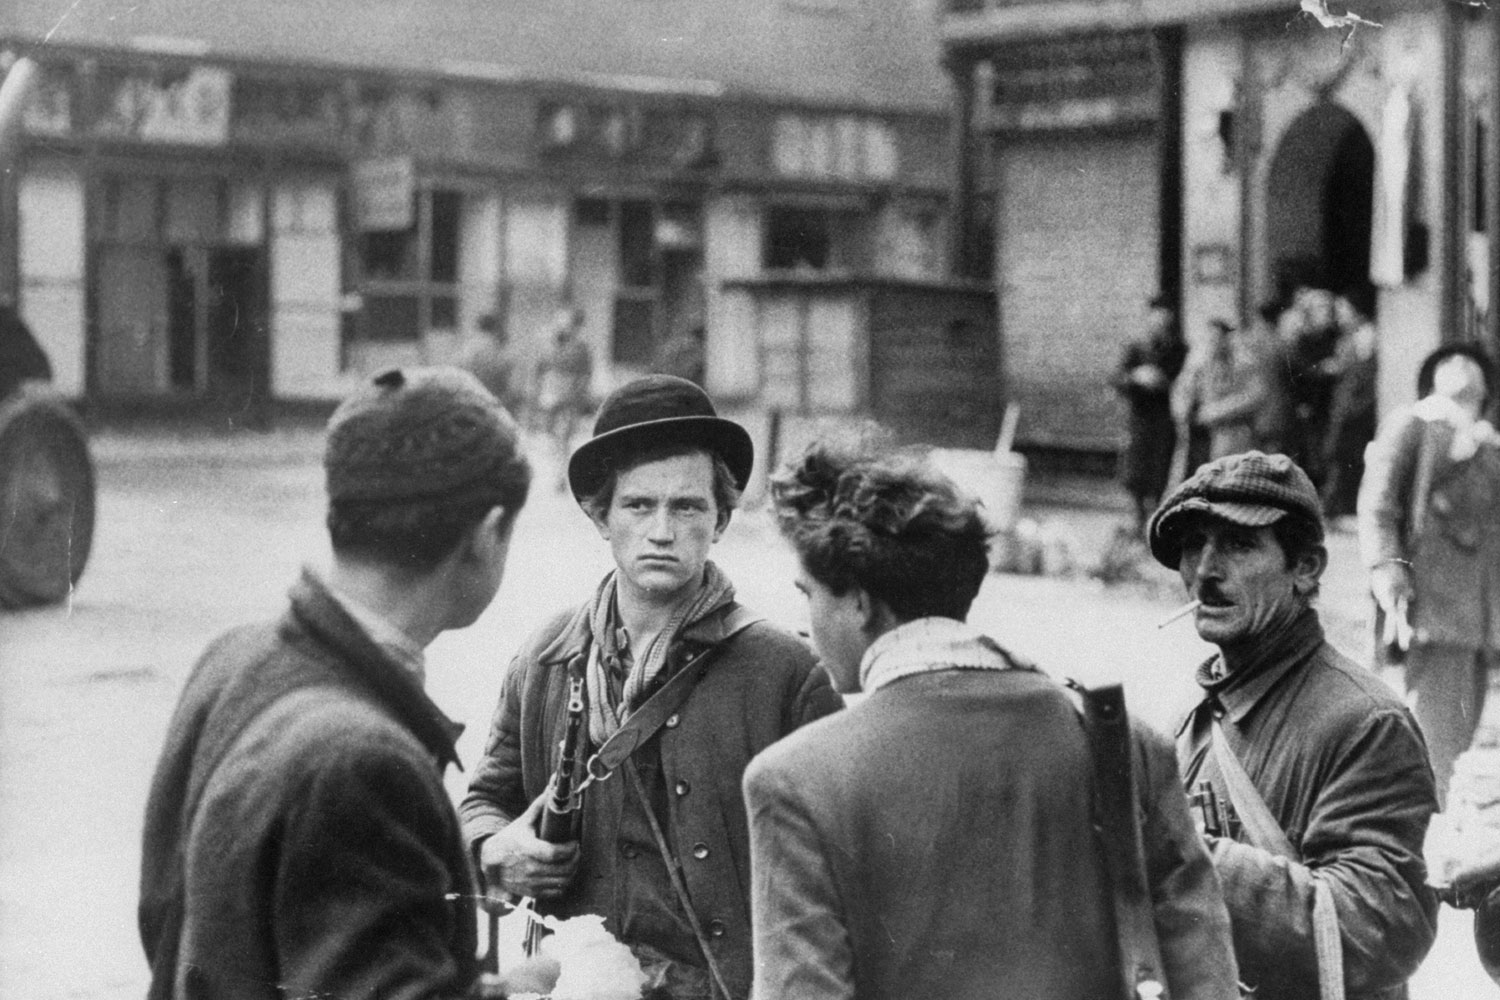 Not published in LIFE. Hungarian rebel fighters, Budapest, 1956.